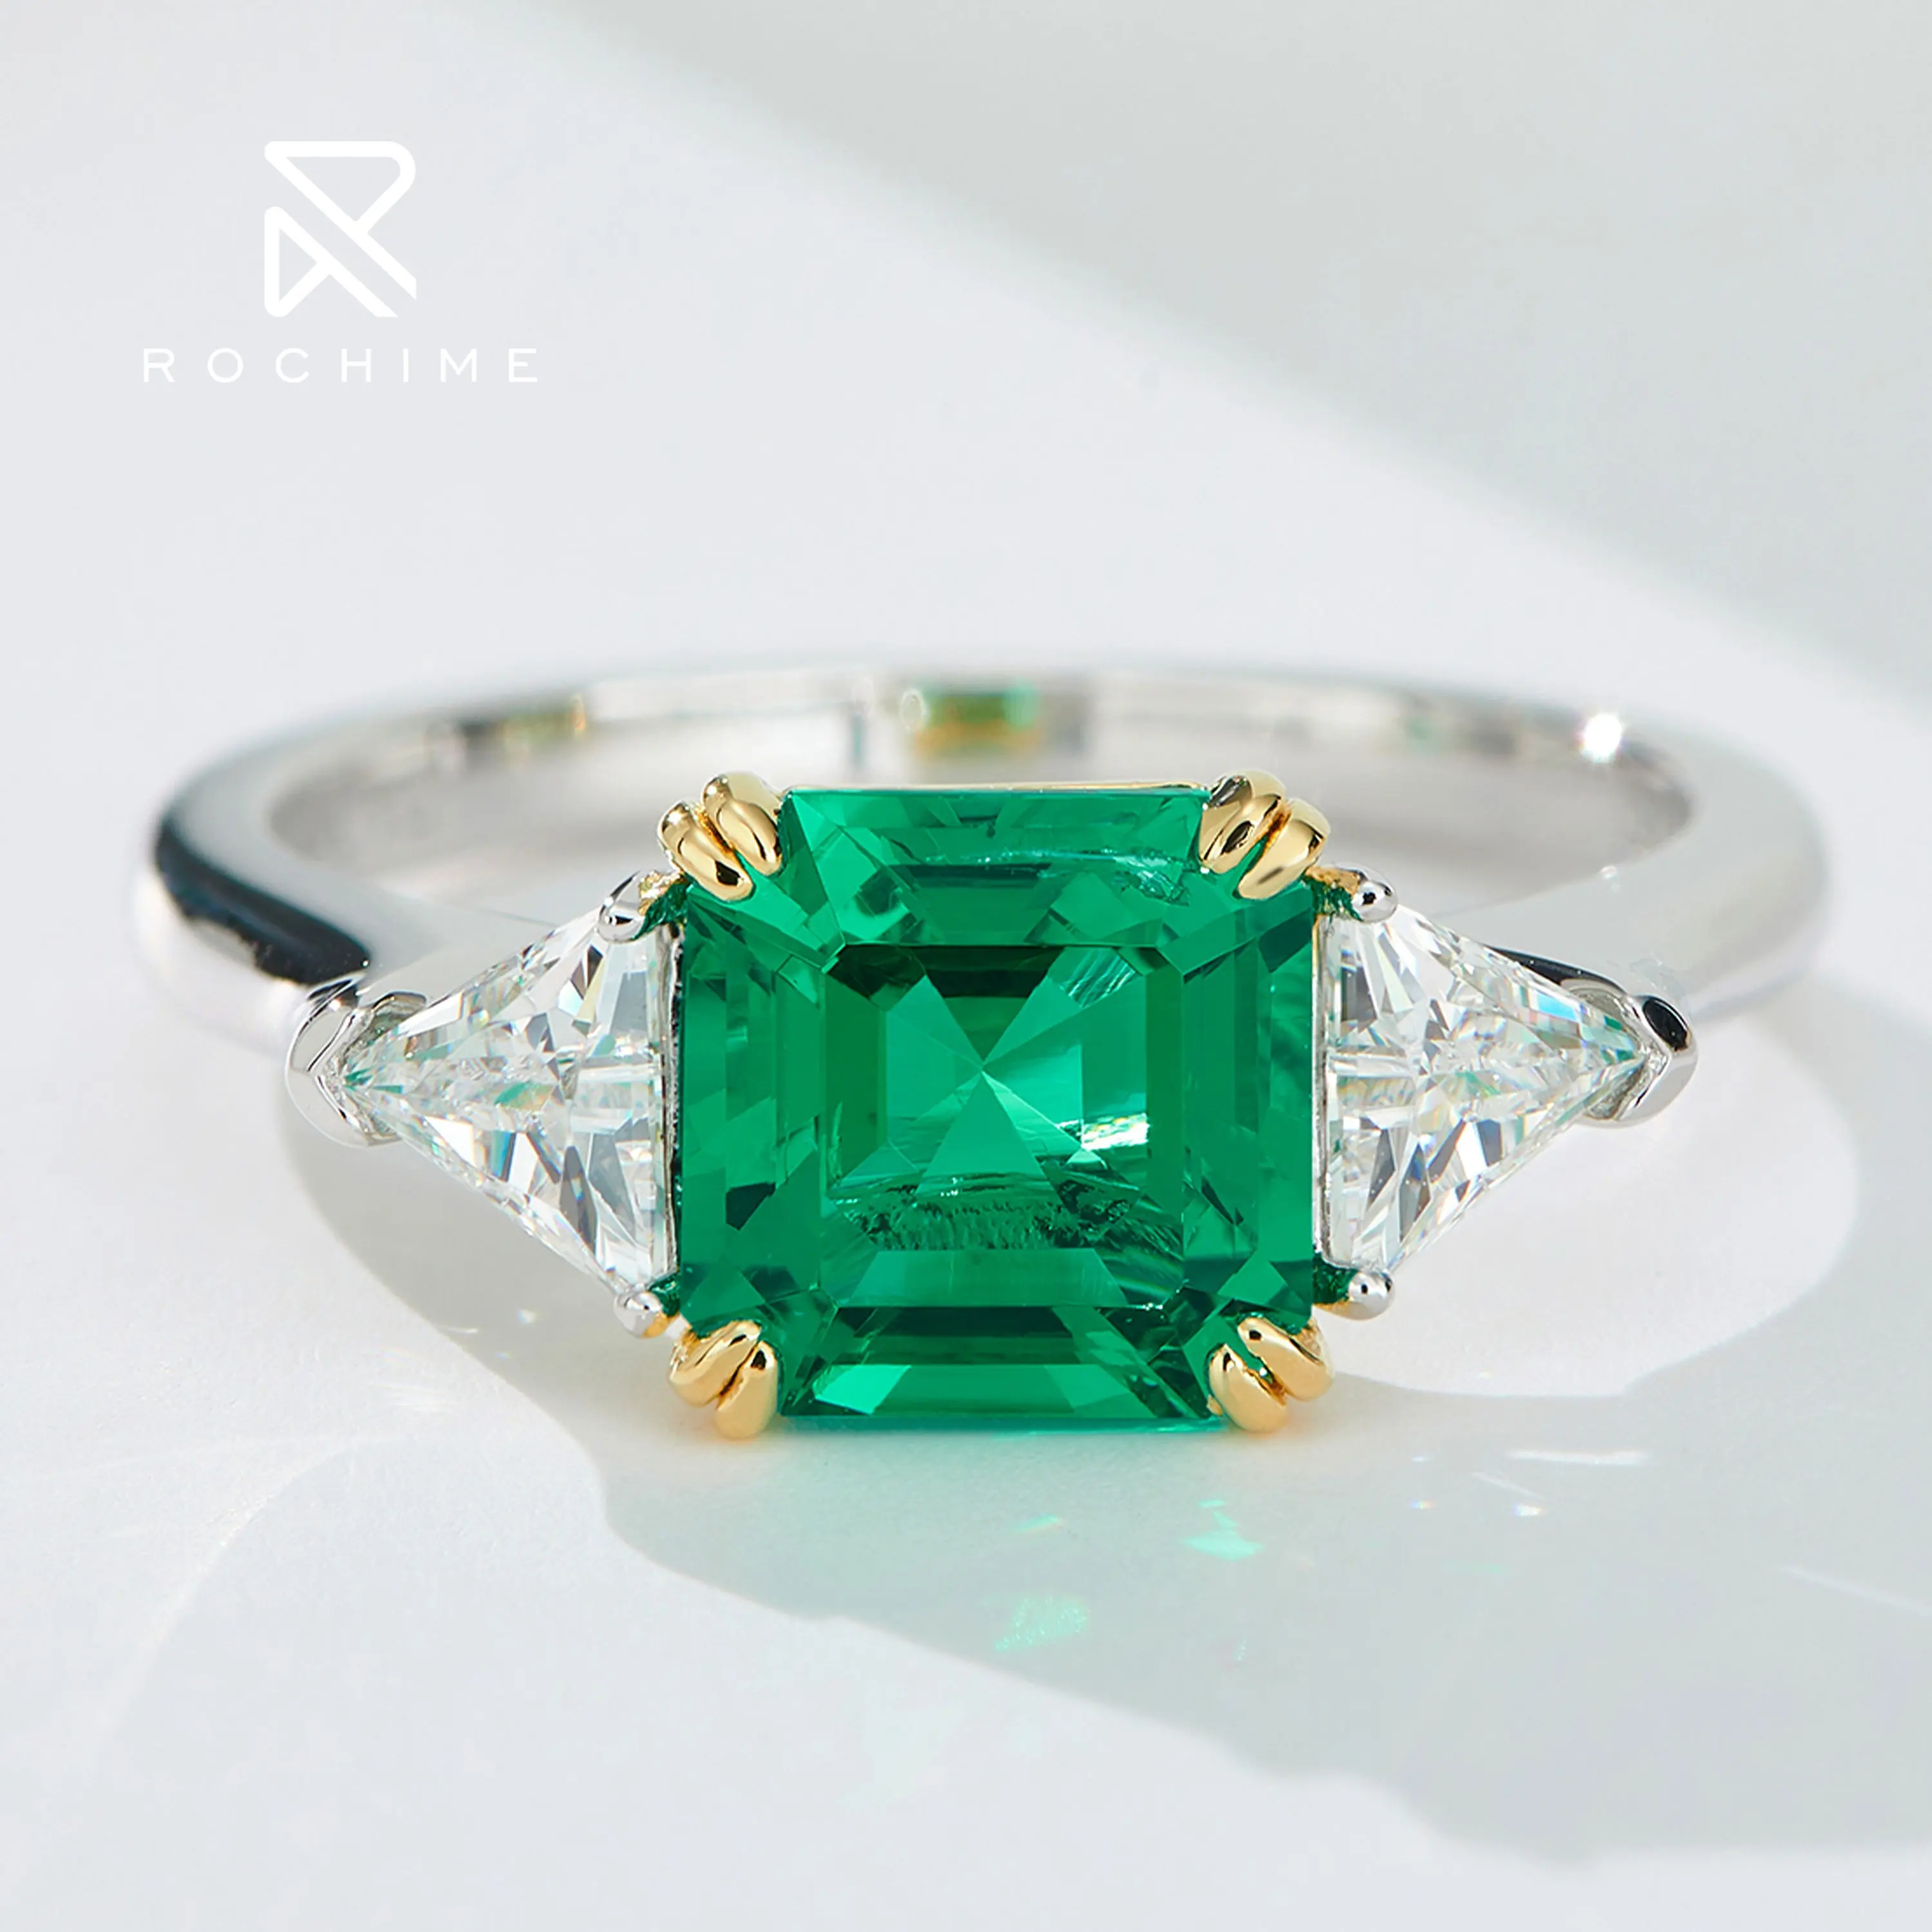 Rochime lab grown emerald rings women marriage 14k 18k white rose gold plated ring sterling silver 925 jewellery